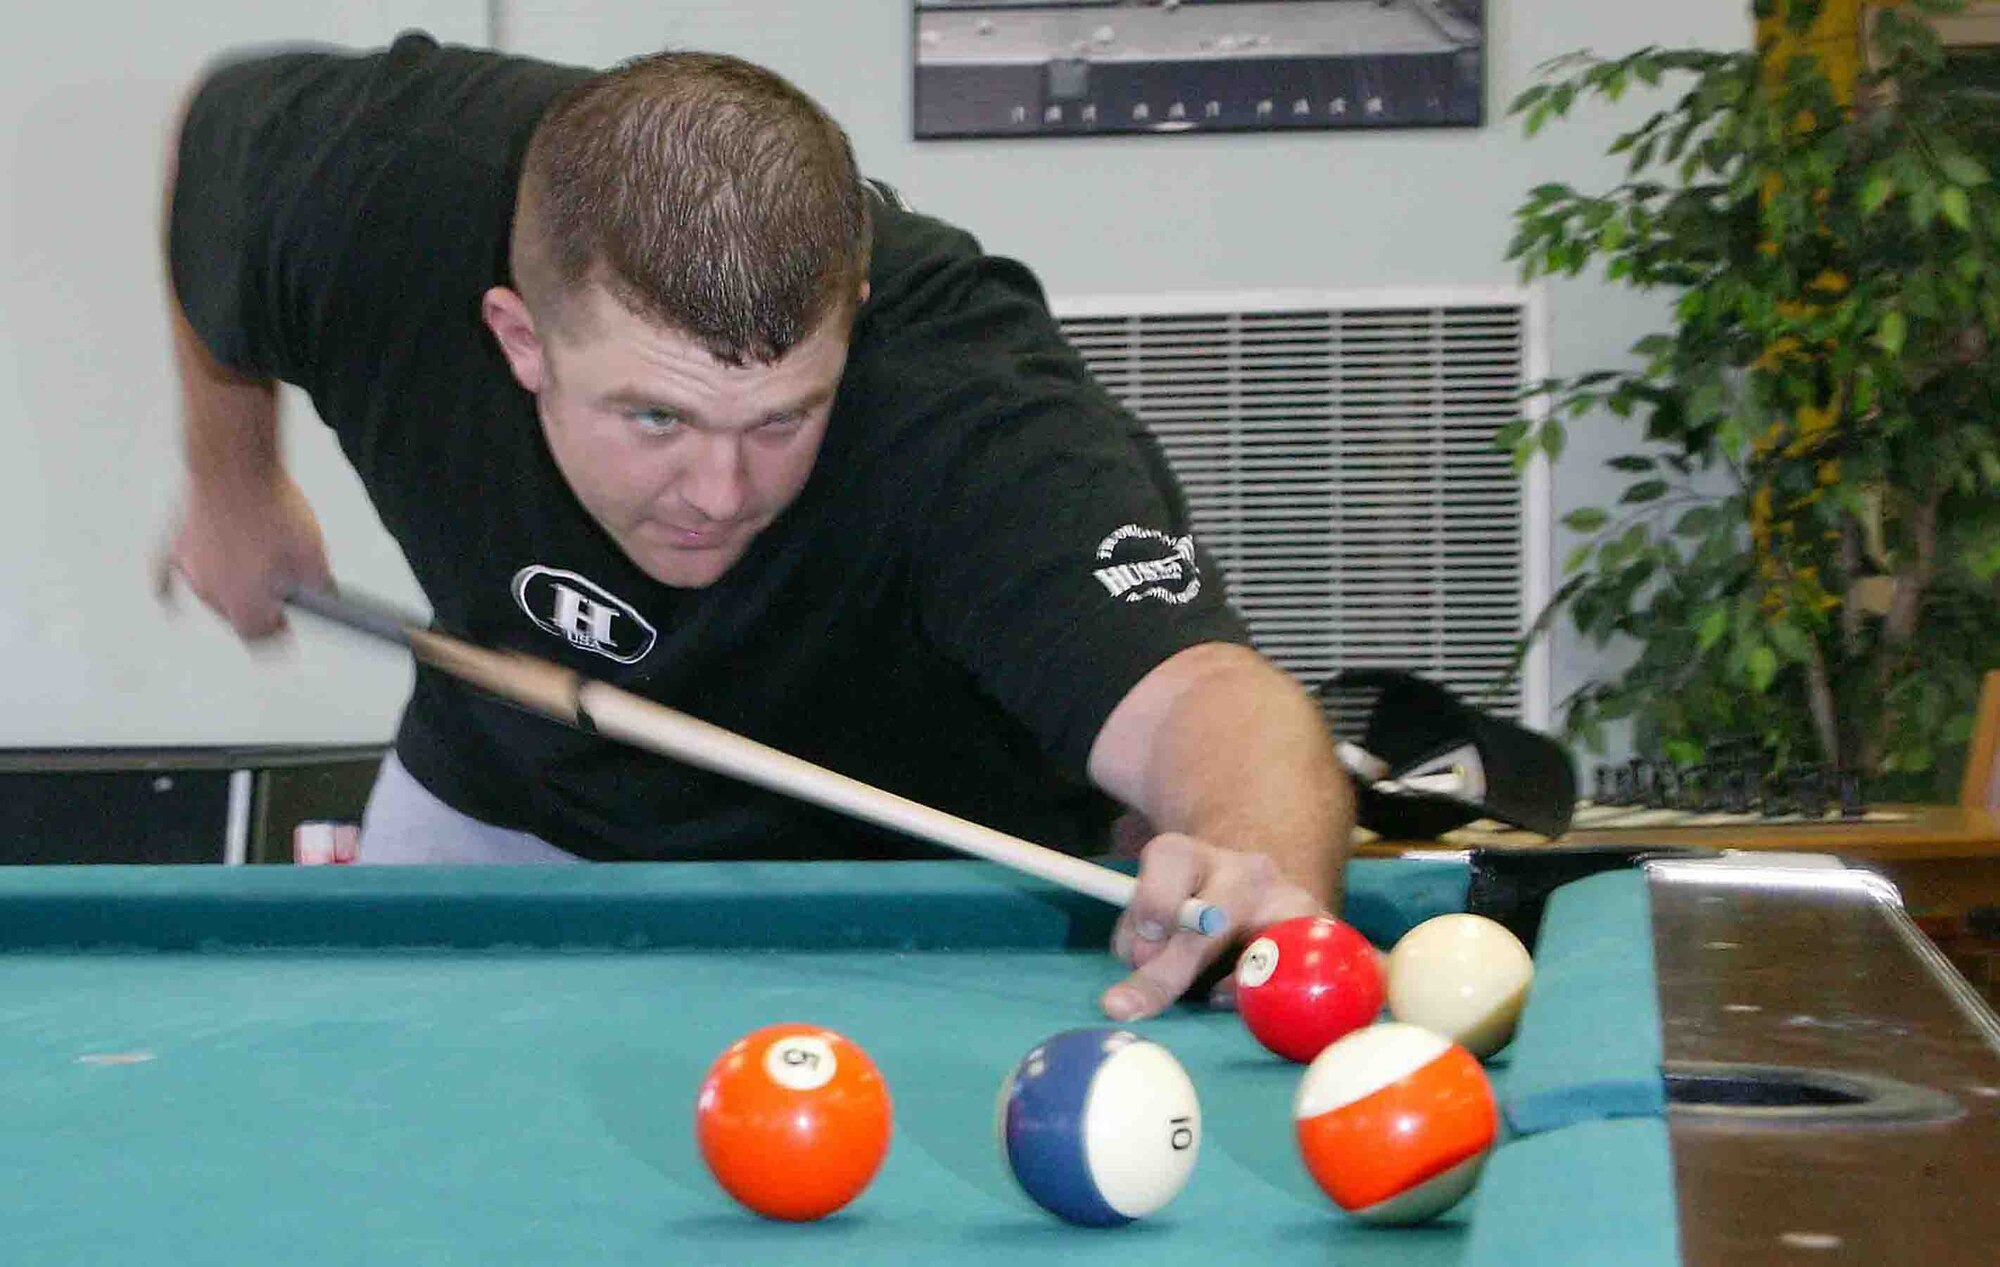 SHAW AIR FORCE BASE, S.C. -- Senior Airman Eric Charlton, 20th Civil Engineer Squadron Explosive Ordnance Disposal technician, performs a trick shot March 5 at the community center. Airman Charlton played the top players from all over the world and won 9th place as well as $500 at the National 9-Ball Bar Table Pool Tournament in Reno, Nev., from Feb. 28 to 30. Airman Charlton said 9th is the best he has ever placed in a national tournament. He competed against 145 people and won seven matches in a row to further himself to victory when he lost against Kim Davenport who plays on the U.S.A. pool team. (U.S. Air Force photo/Senior Airman John Gordinier)